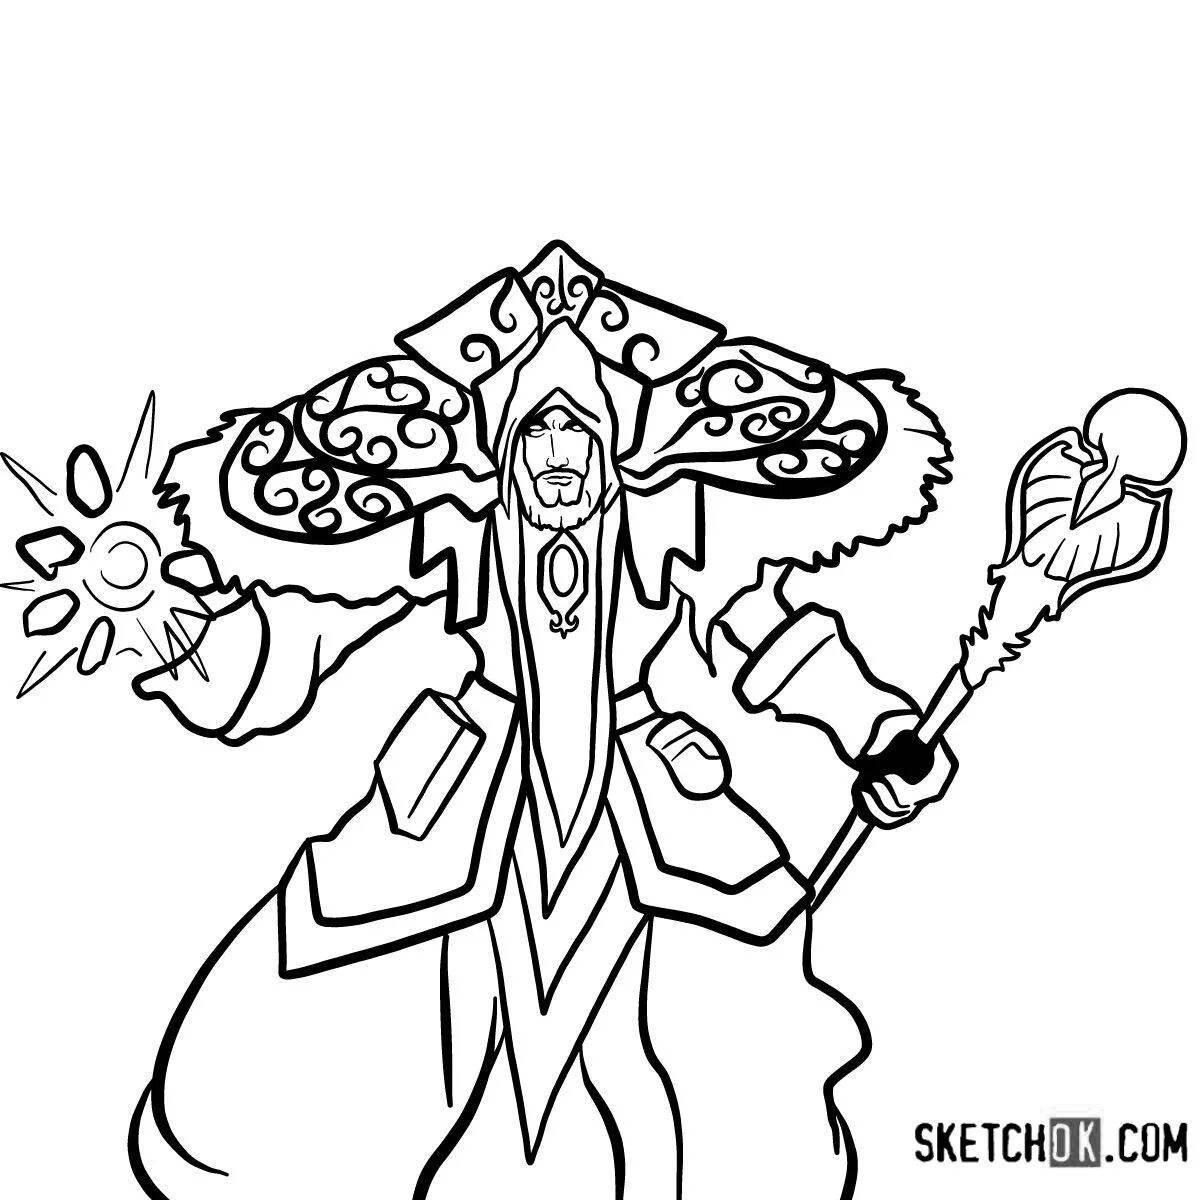 Great warcraft 3 coloring book